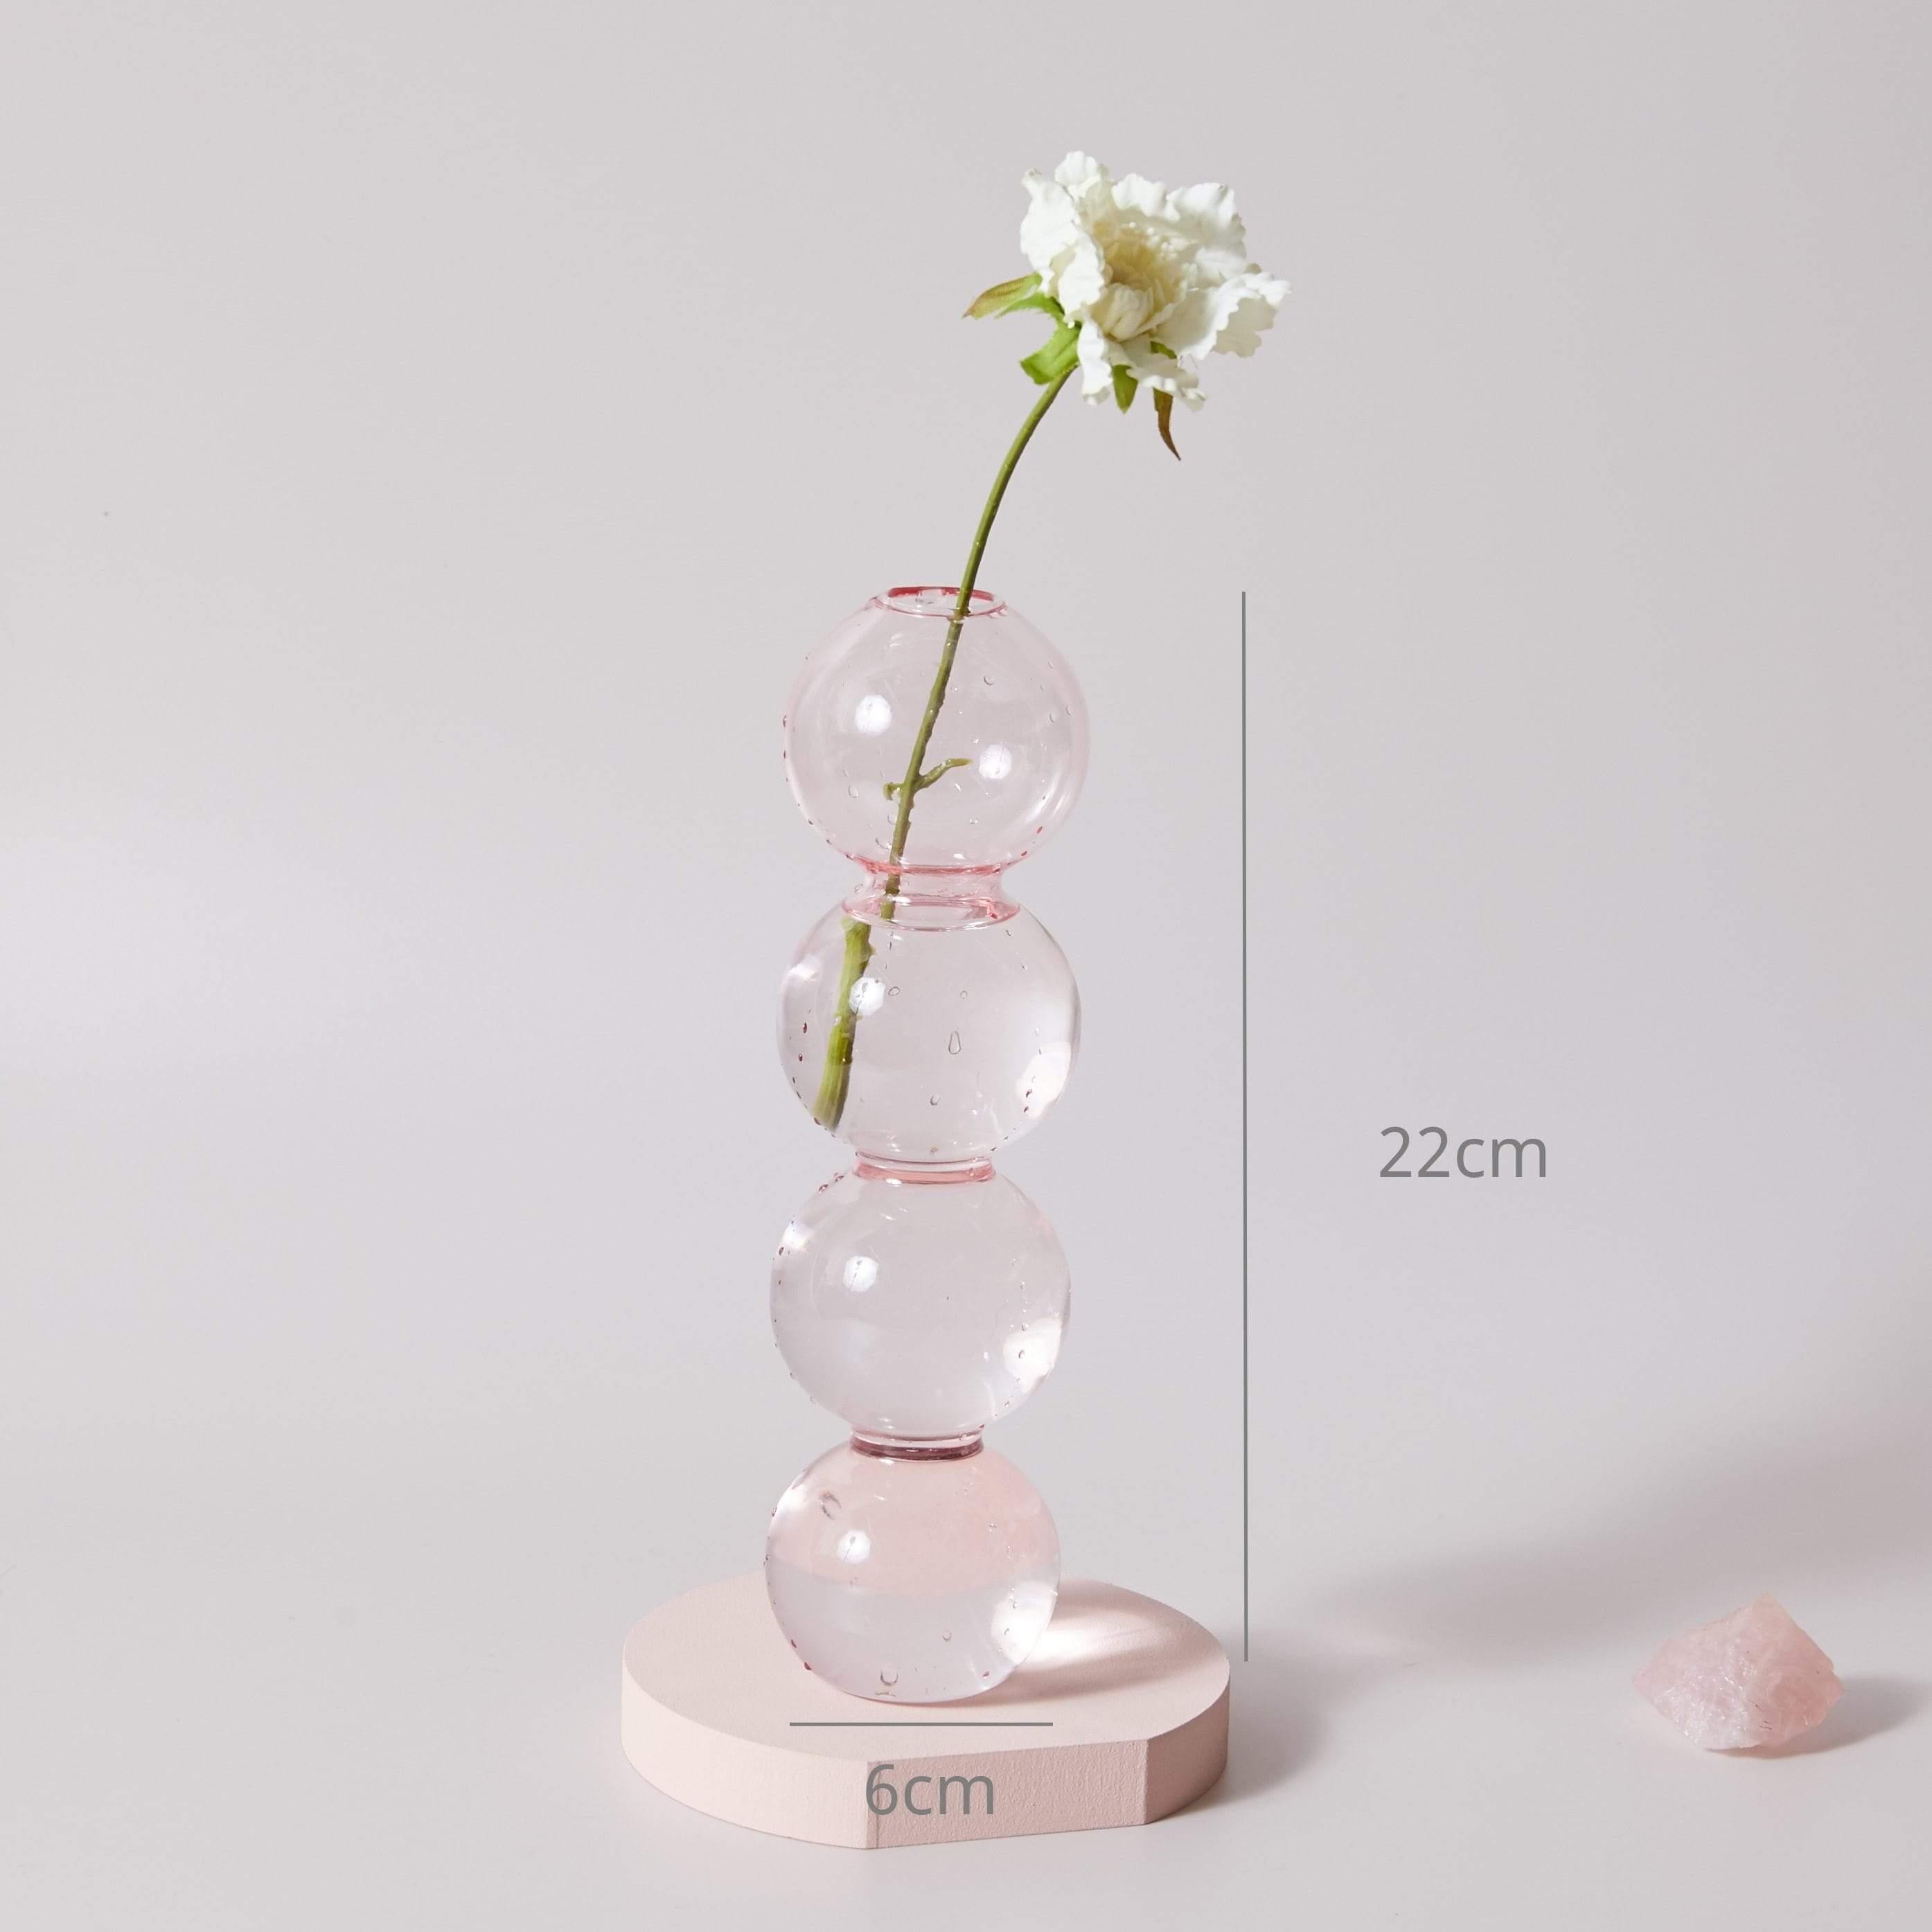 Shop 0 Pink L-bubble Pink Glass Candle Holder Taper Candlesticks Holder Wedding Table Centerpieces Nordic Home Decoration Mademoiselle Home Decor